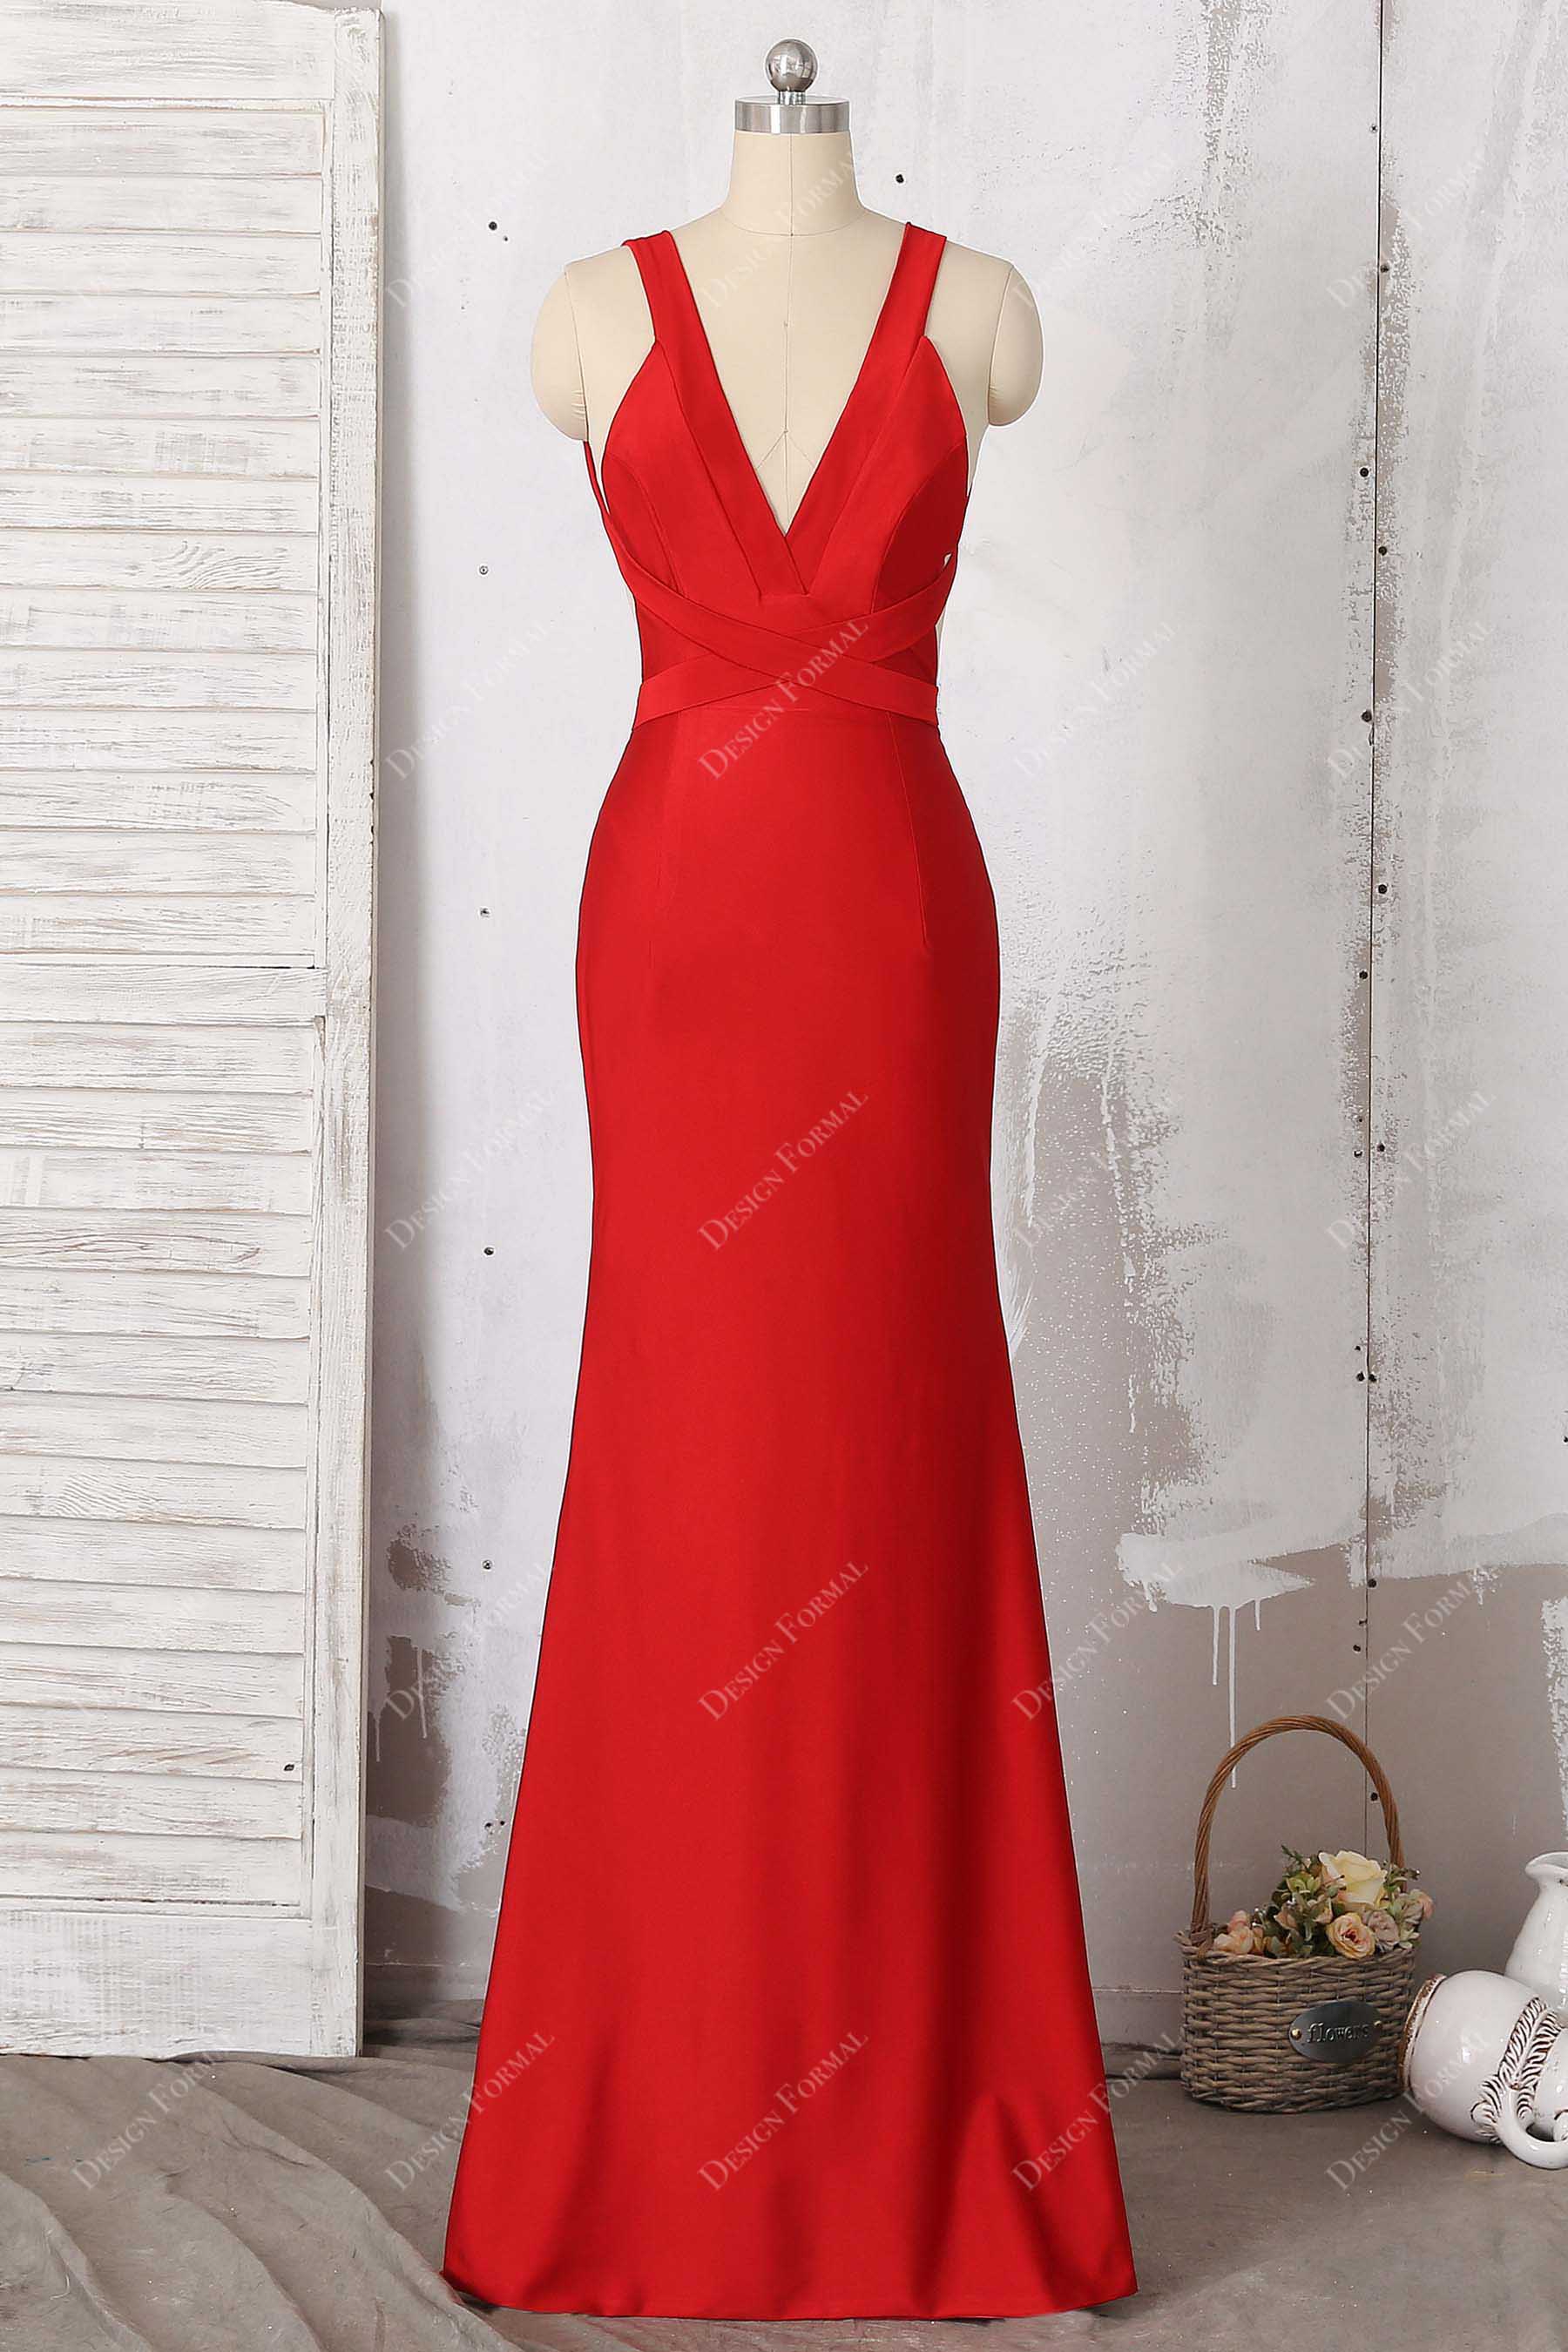 Plunge Red Jersey Gold Lace Cutout Back Dramatic Mermaid Prom Dress